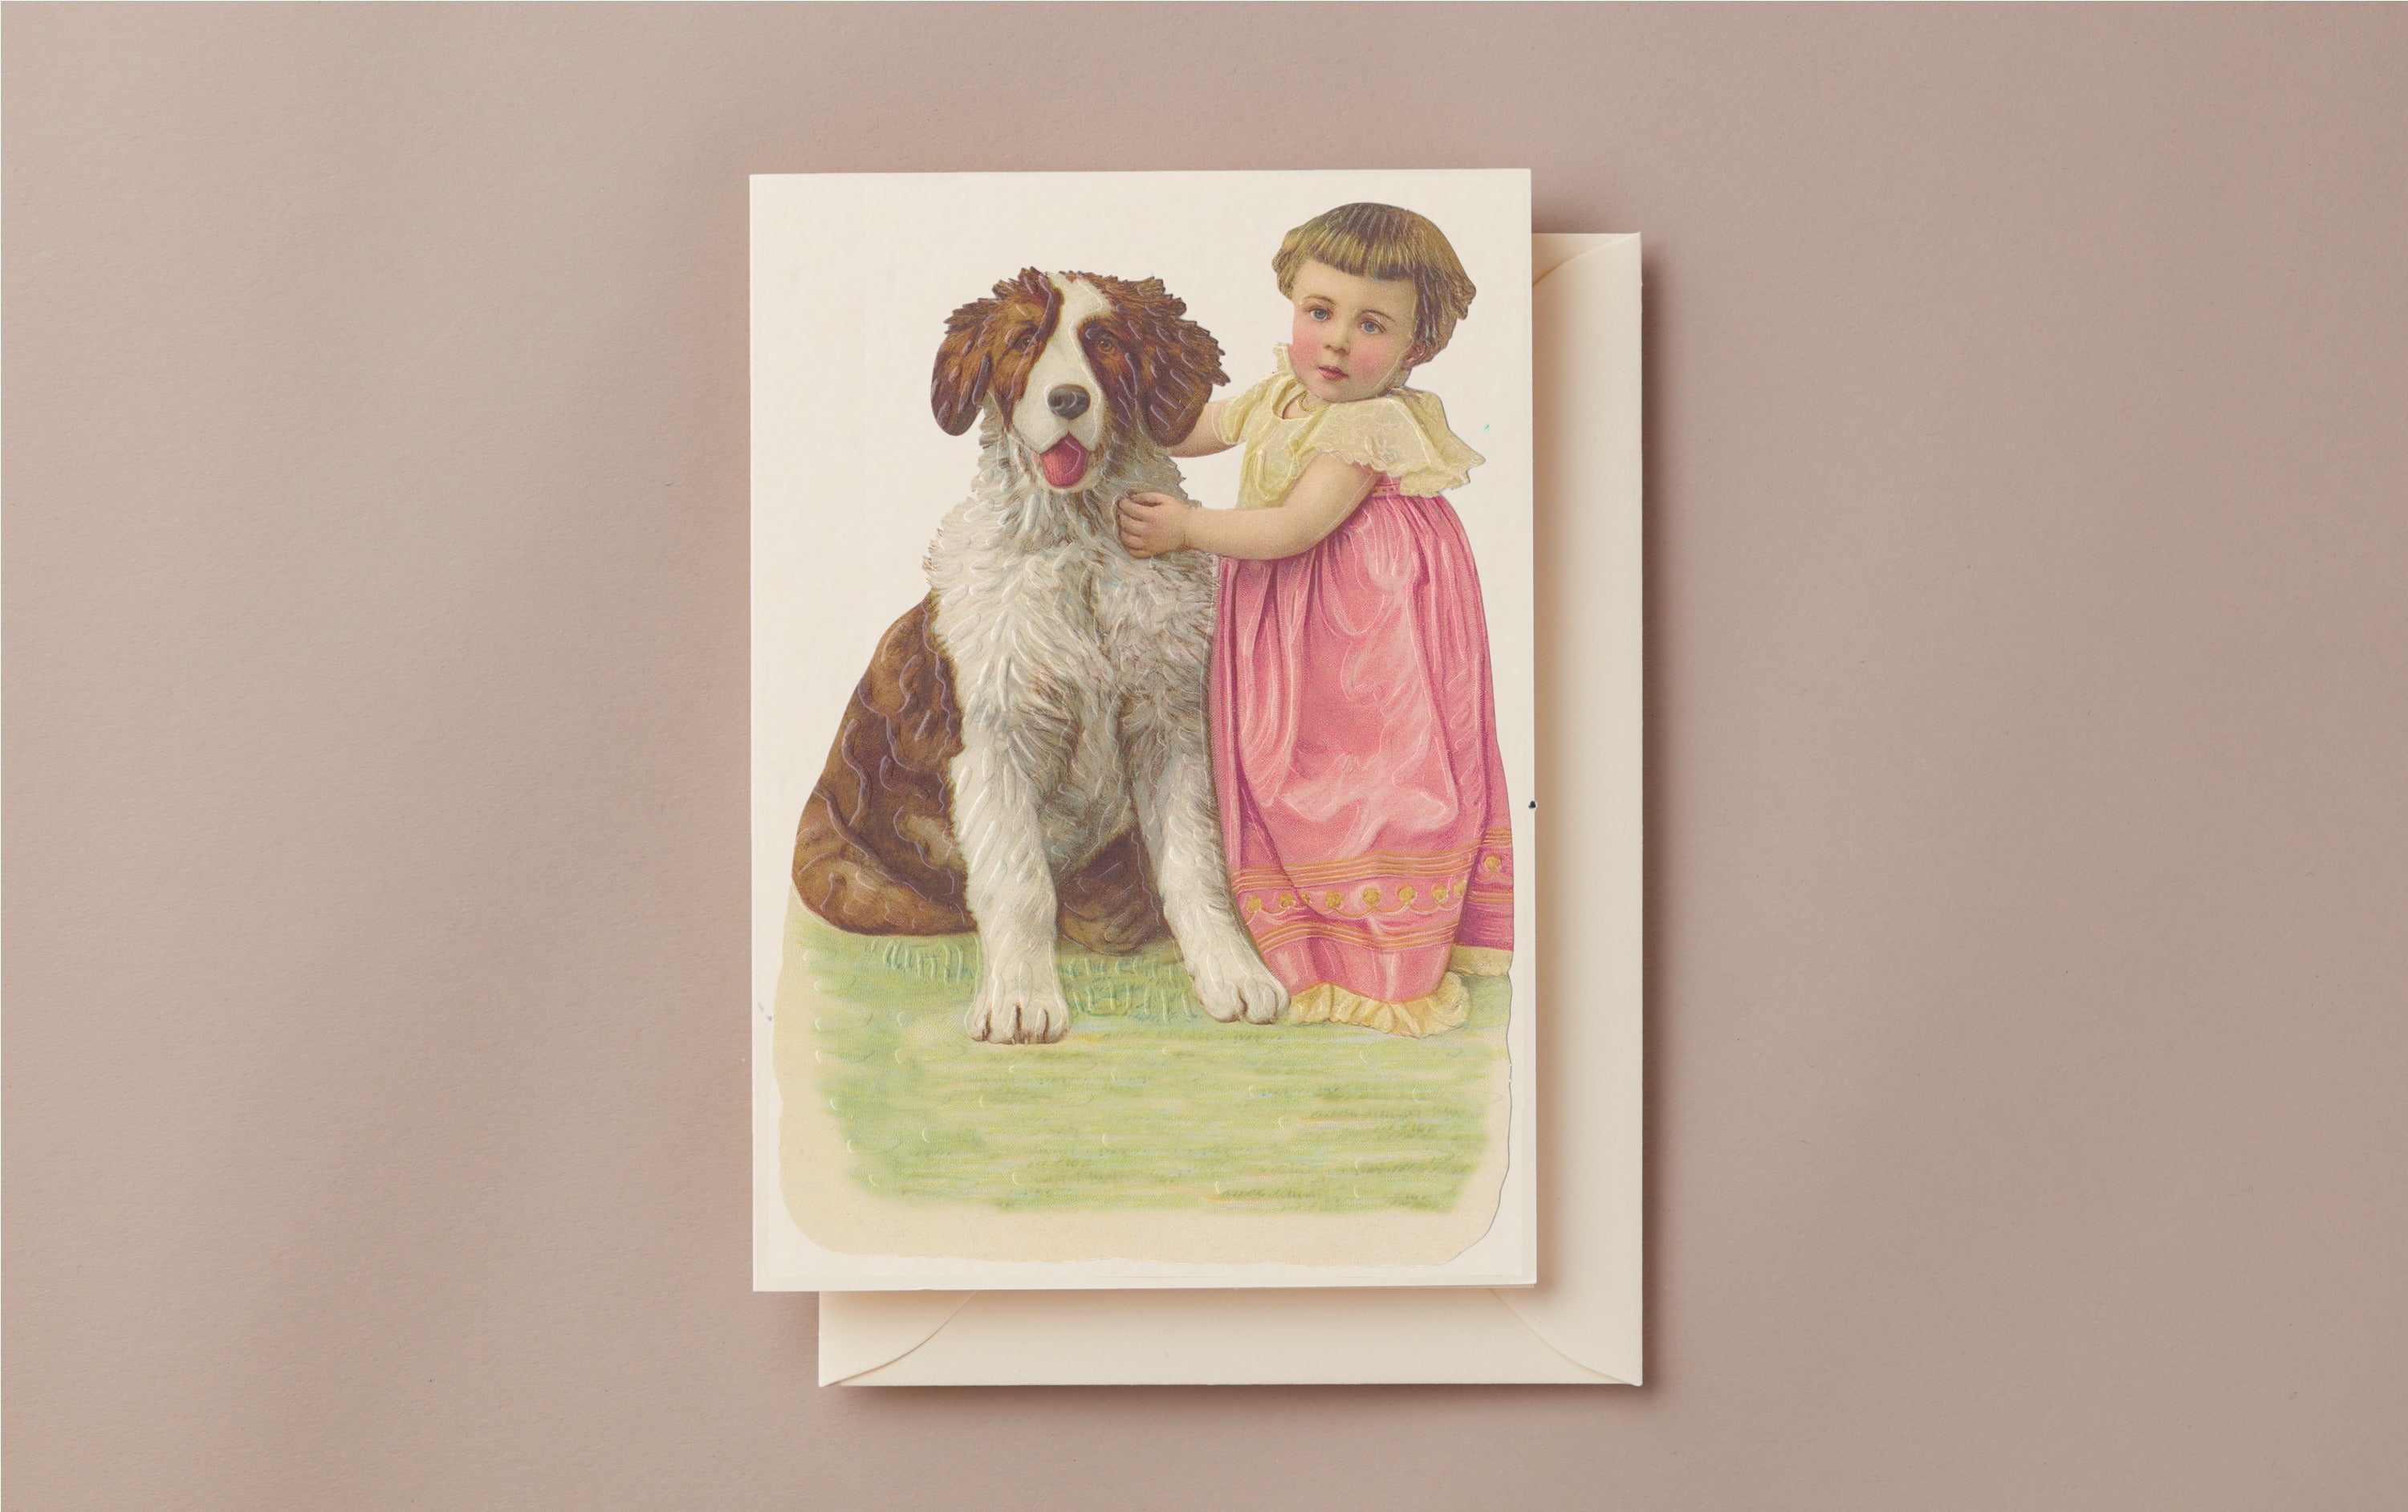 Embossed Die Cut Greeting Card, Child and Puppy